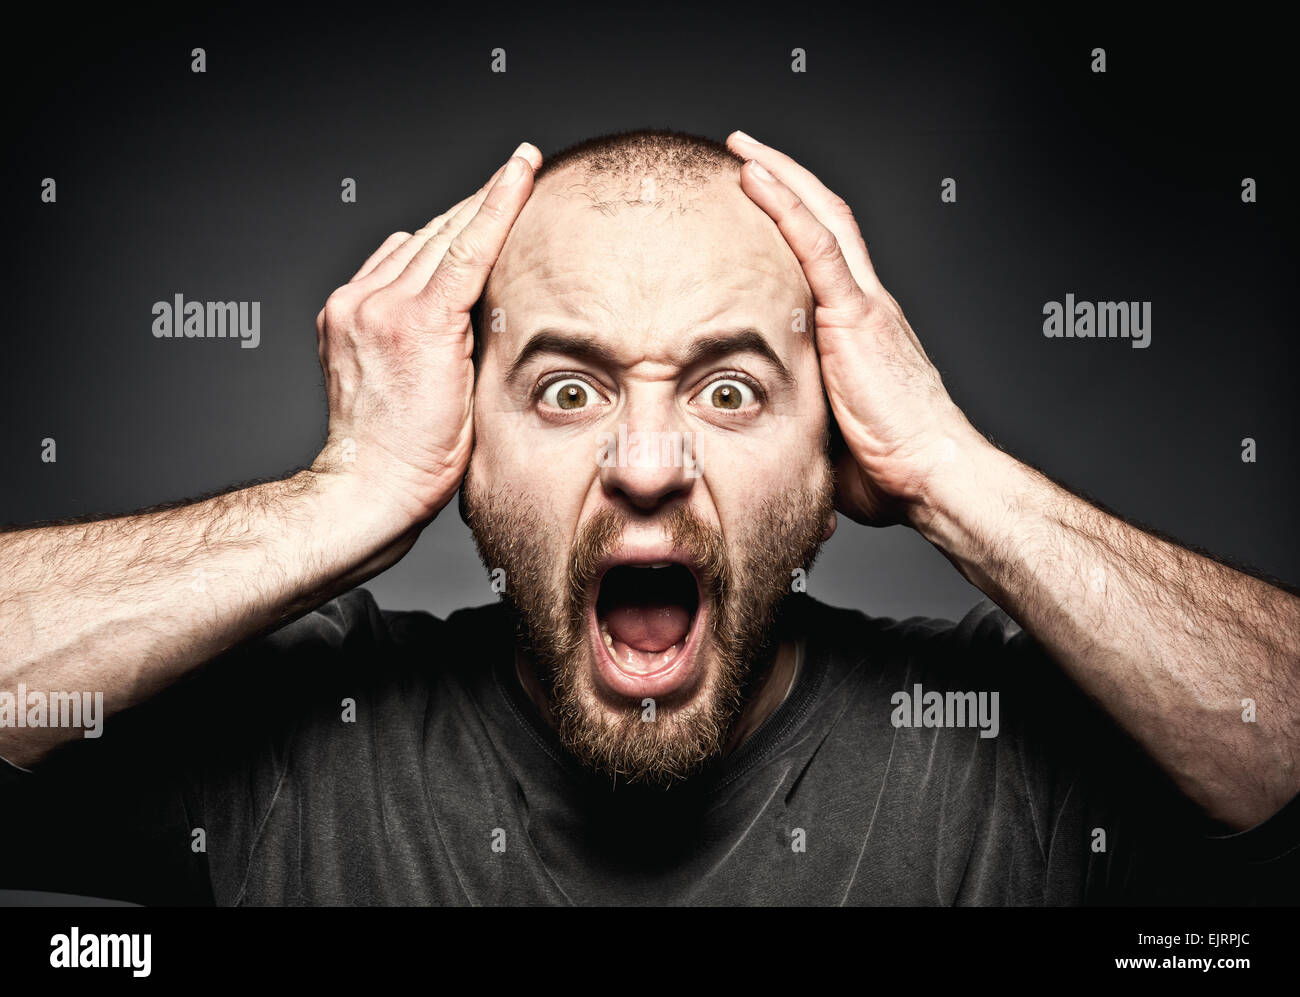 portrait of stressed man face Stock Photo